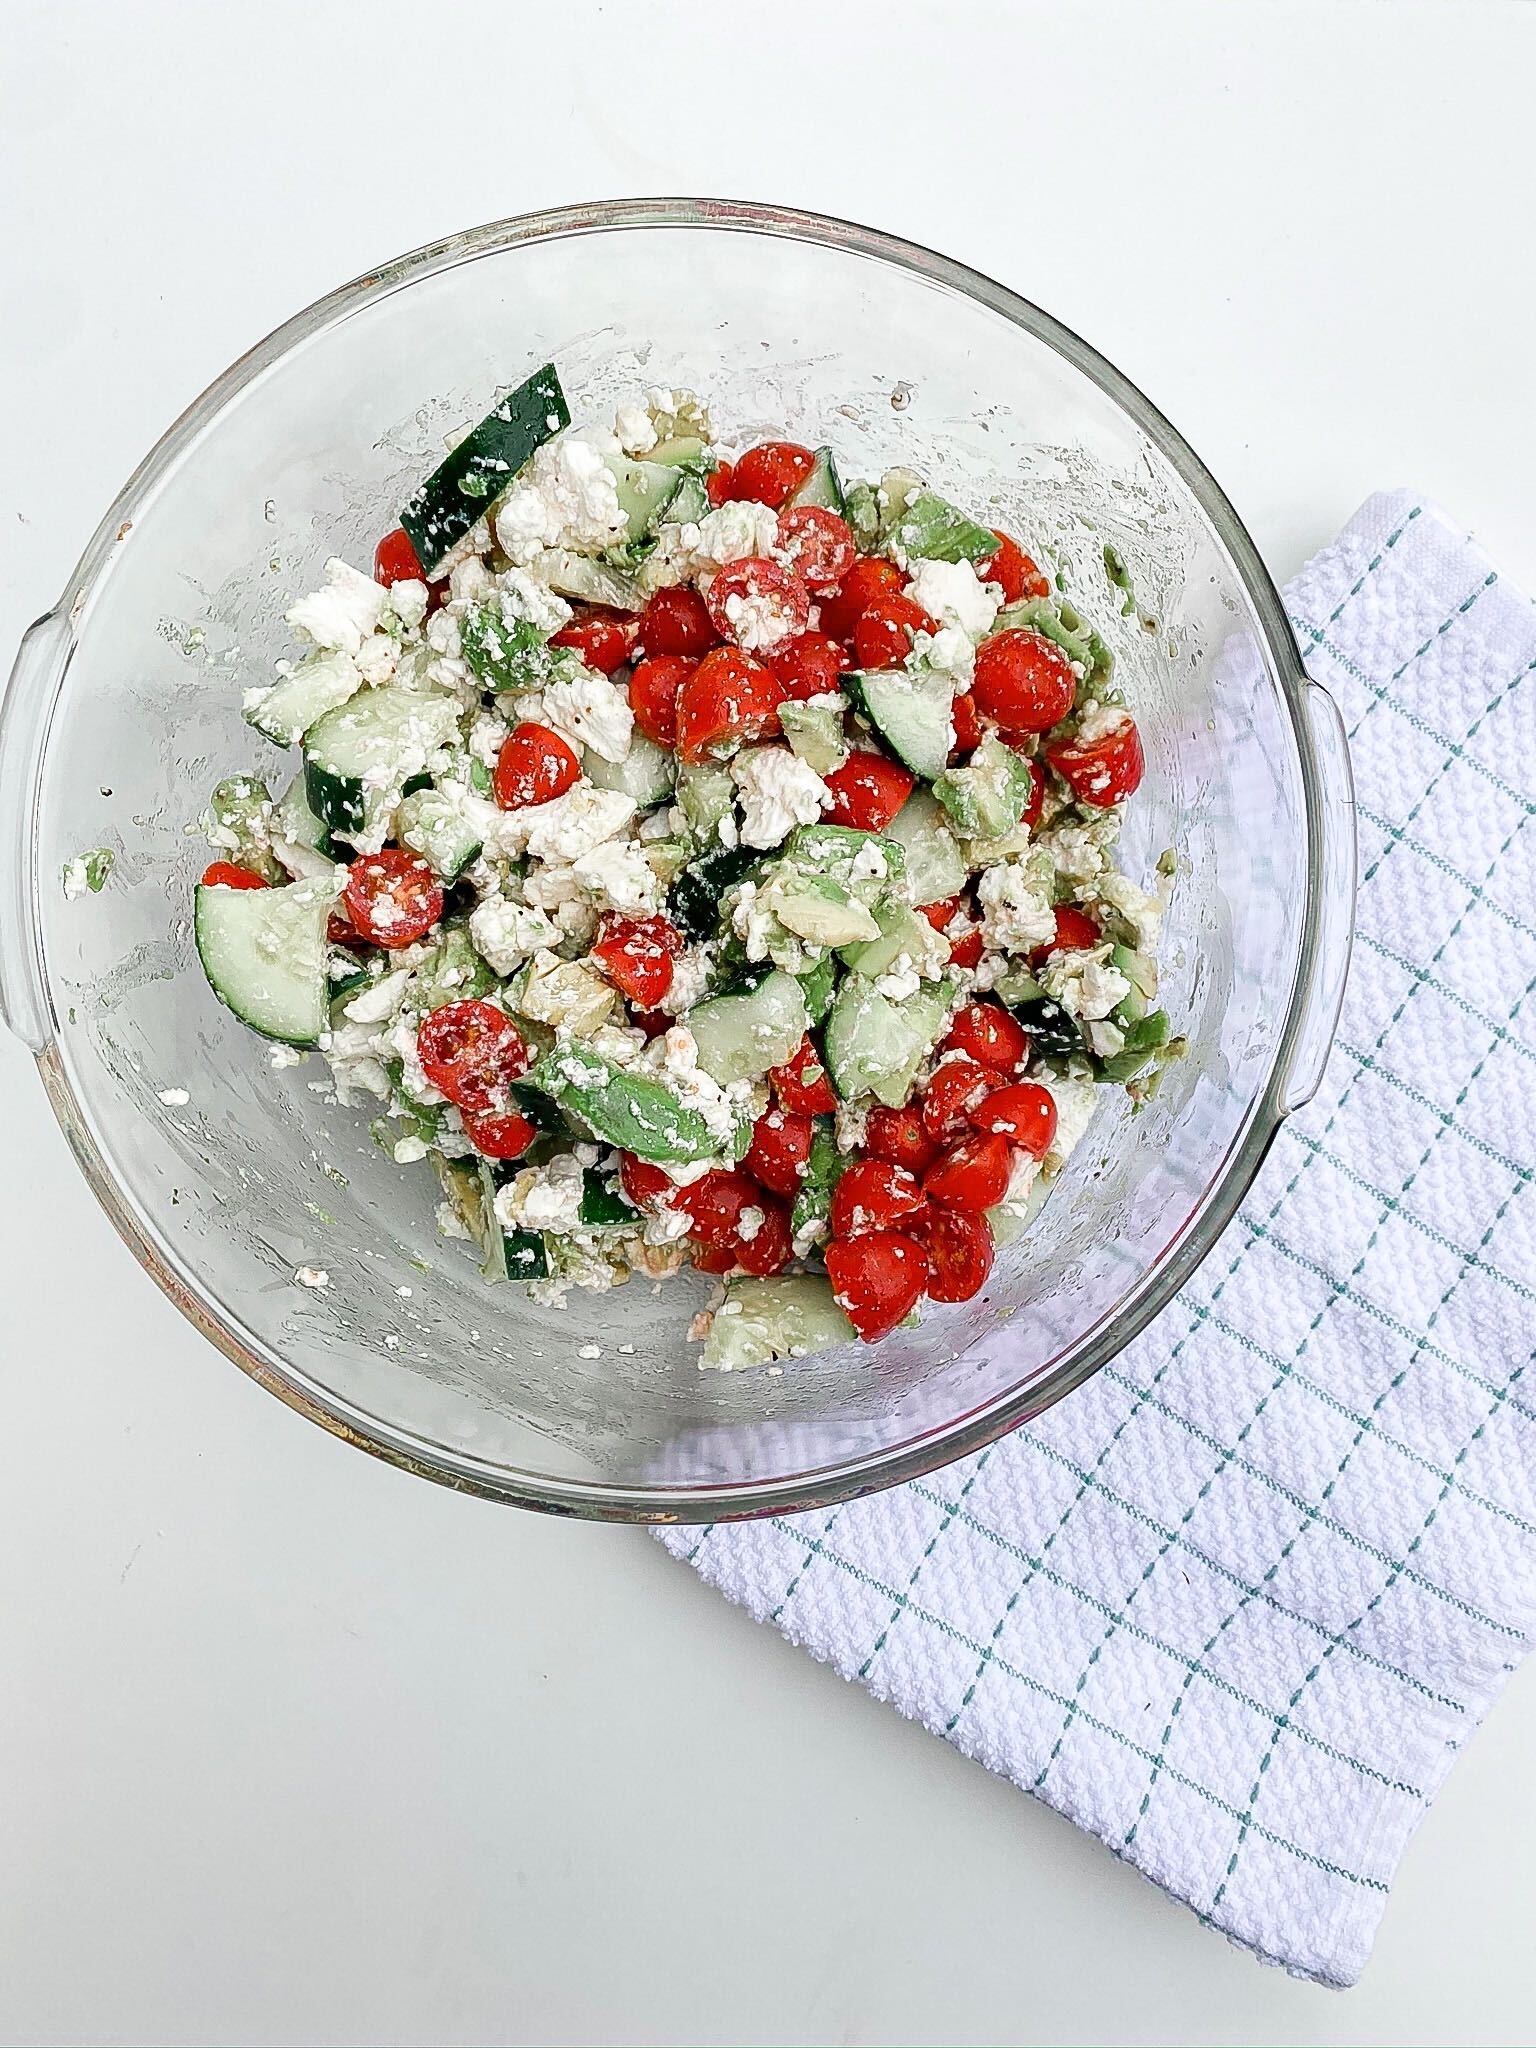 Avocado Cucumber Tomato Salad by Alabama Food + Health blogger, Heather Brown // My Life Well Loved